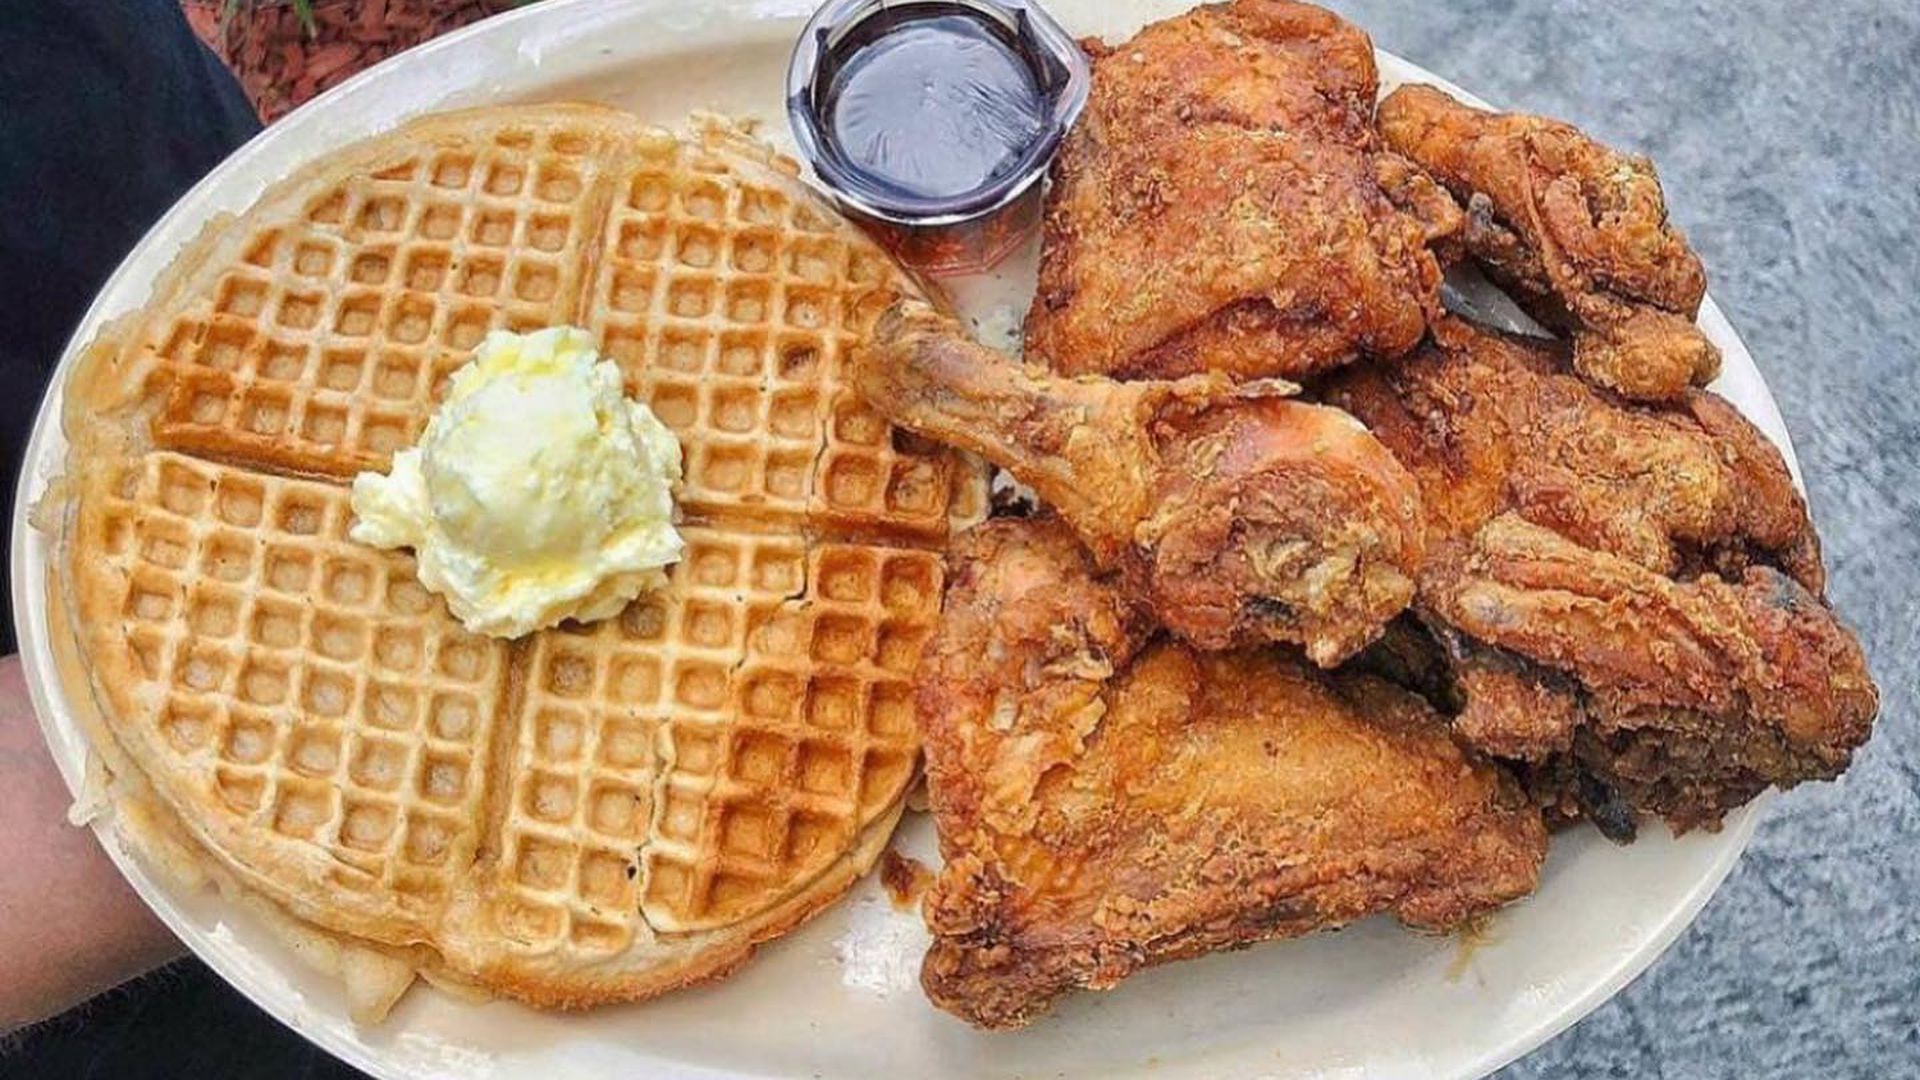 roscoe’s house chicken and waffles could finally open in the next few months